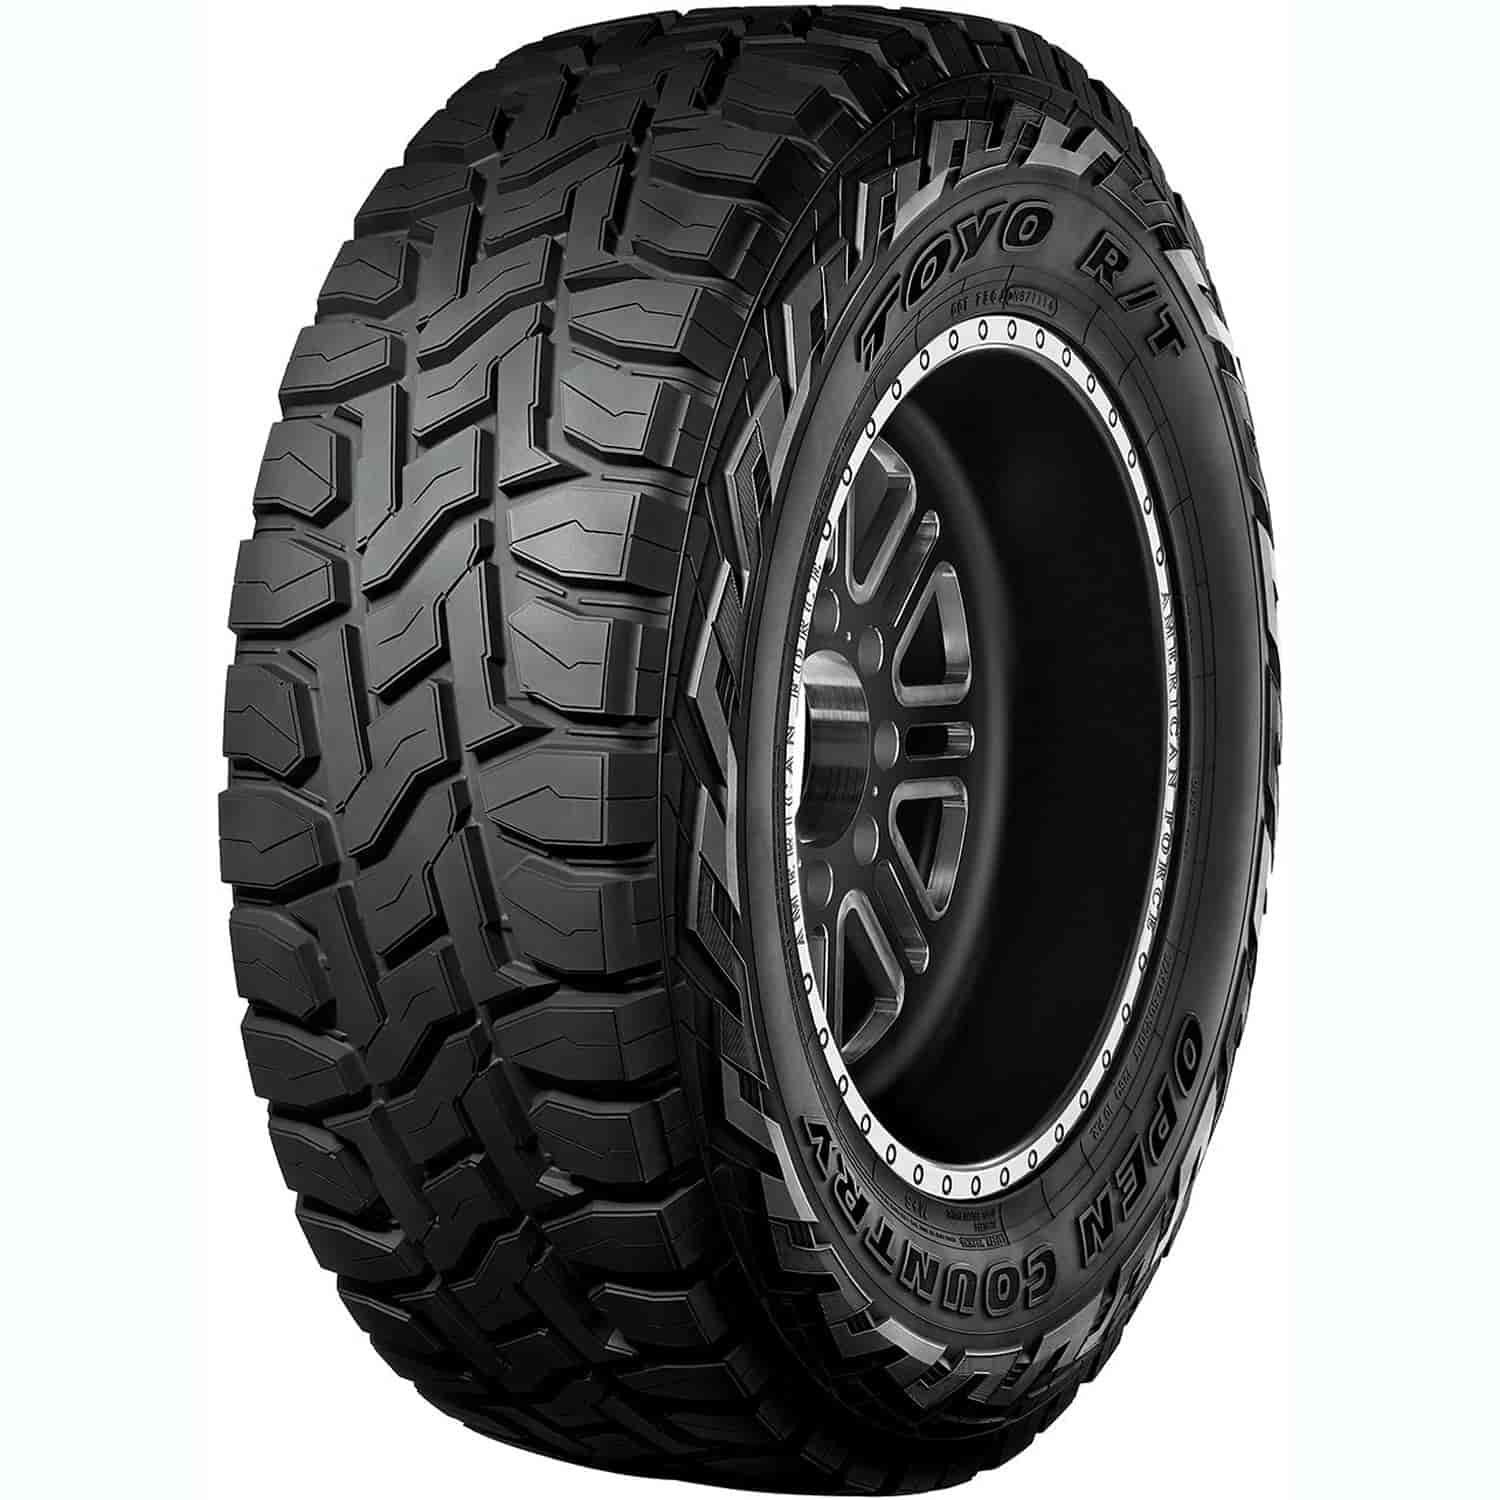 OPEN COUNTRY R/T LT285/60R18 122Q